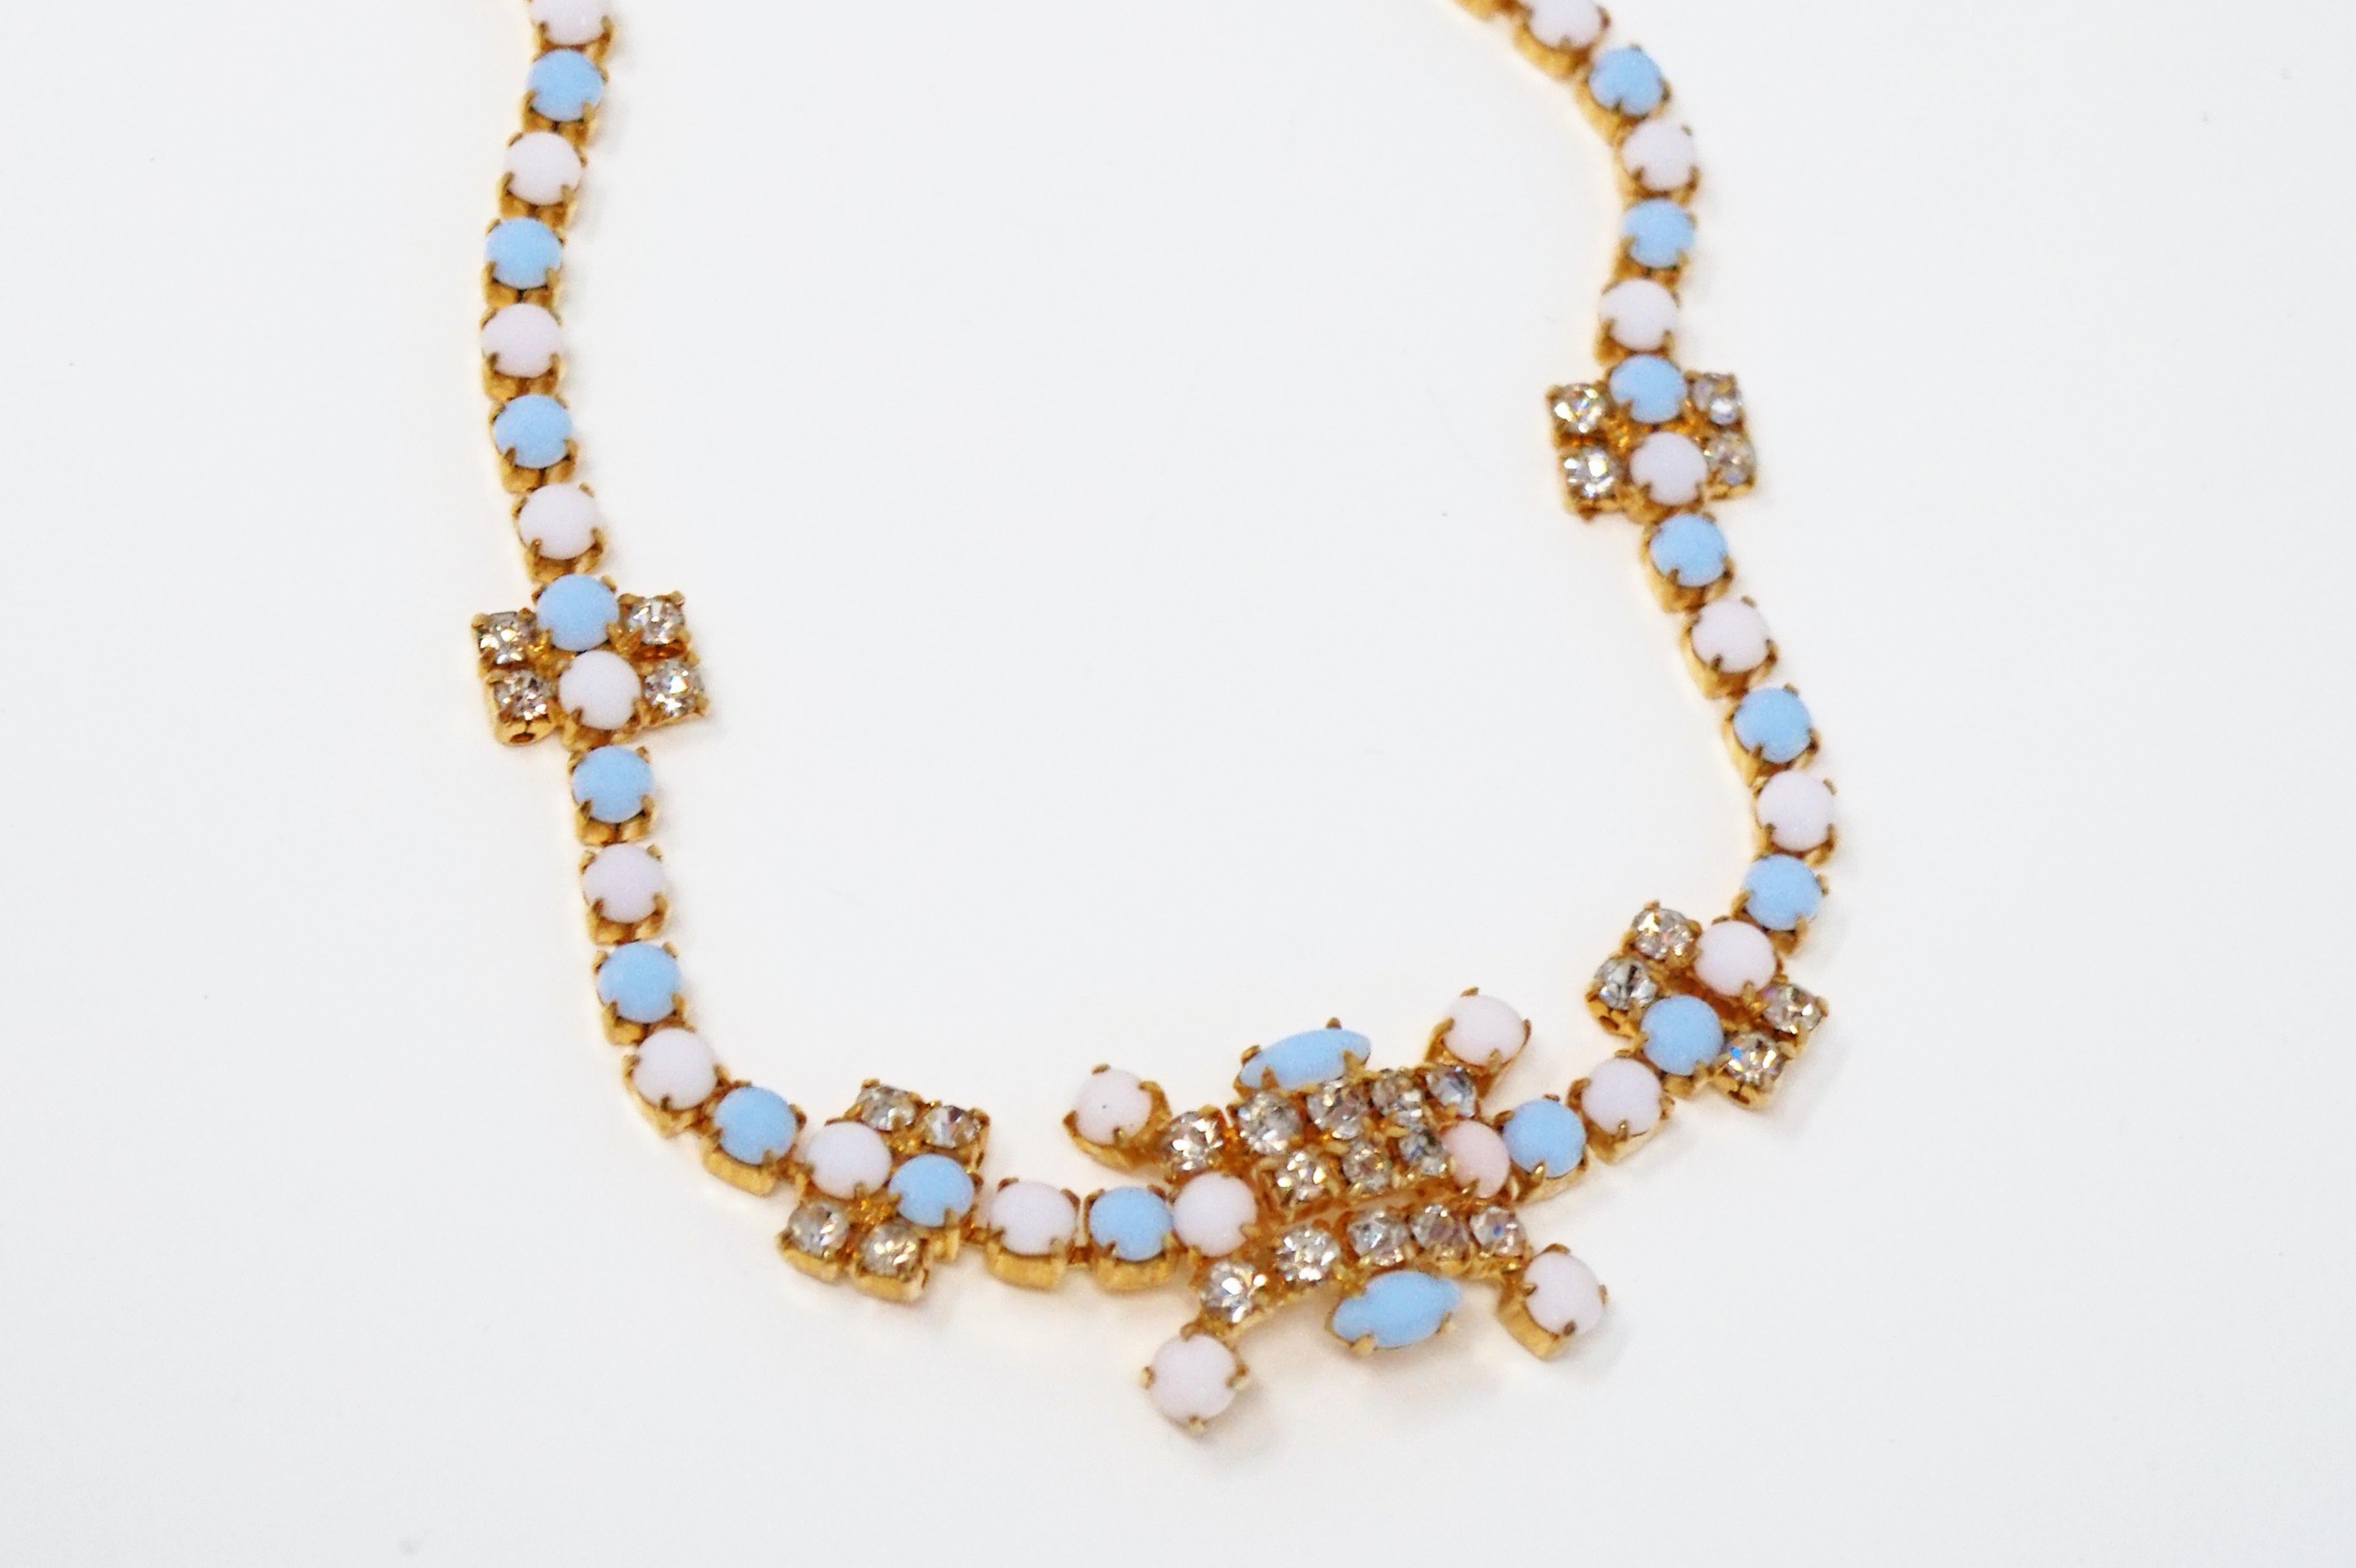 Modern Vintage Periwinkle & White Milk Glass and Rhinestone Necklace, circa 1960s